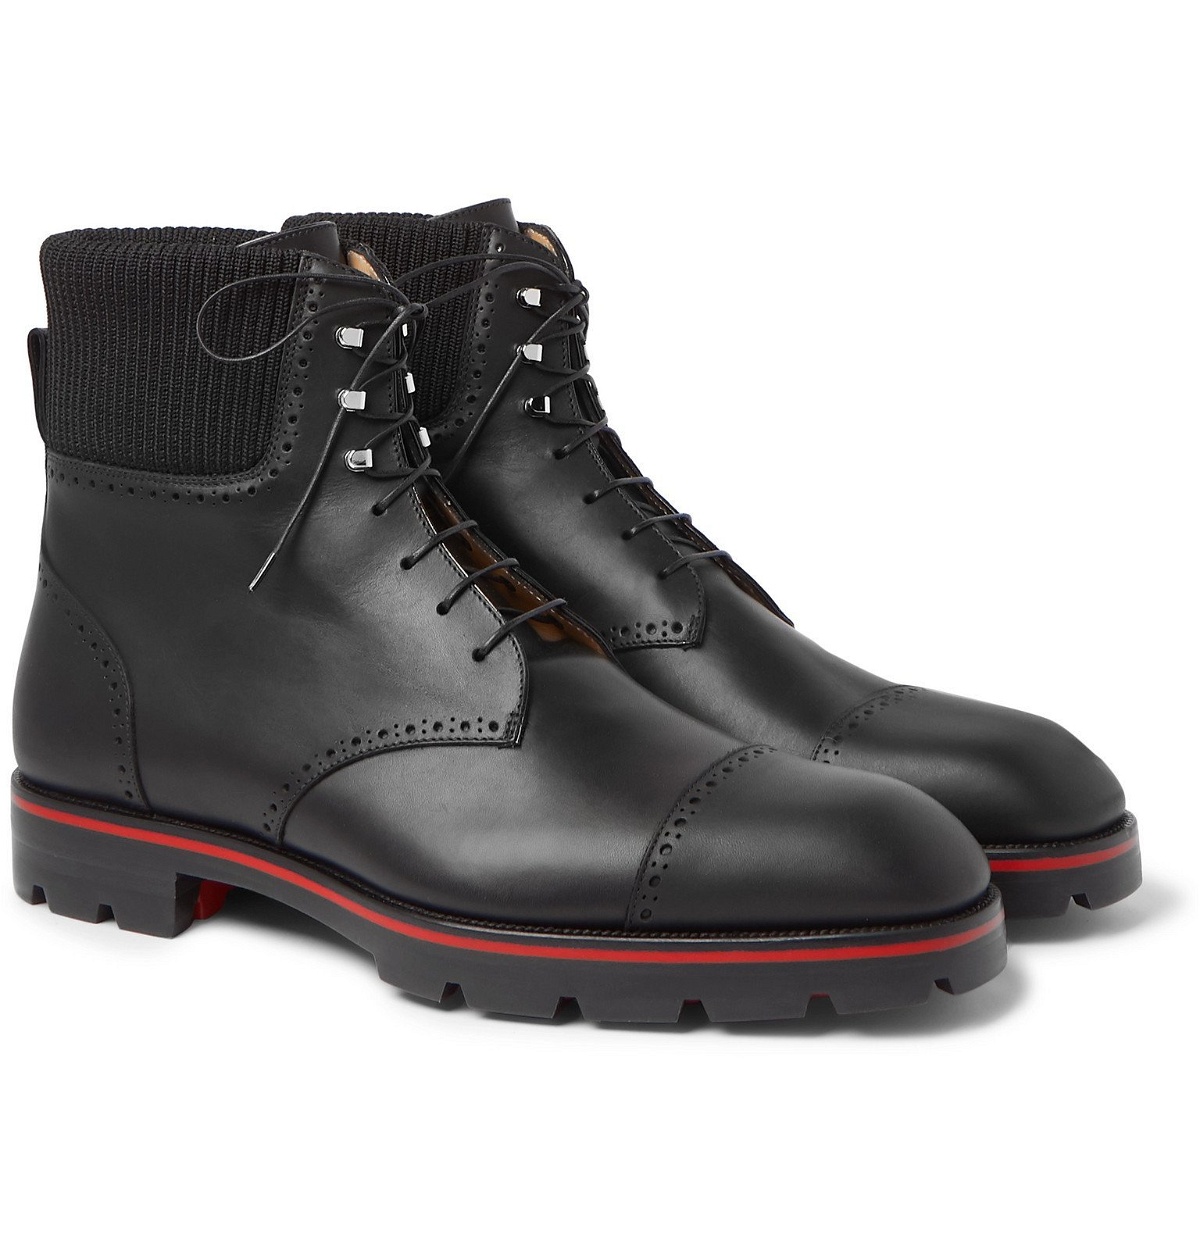 Trapman - Ankle boots - Calf leather - Black - Christian Louboutin